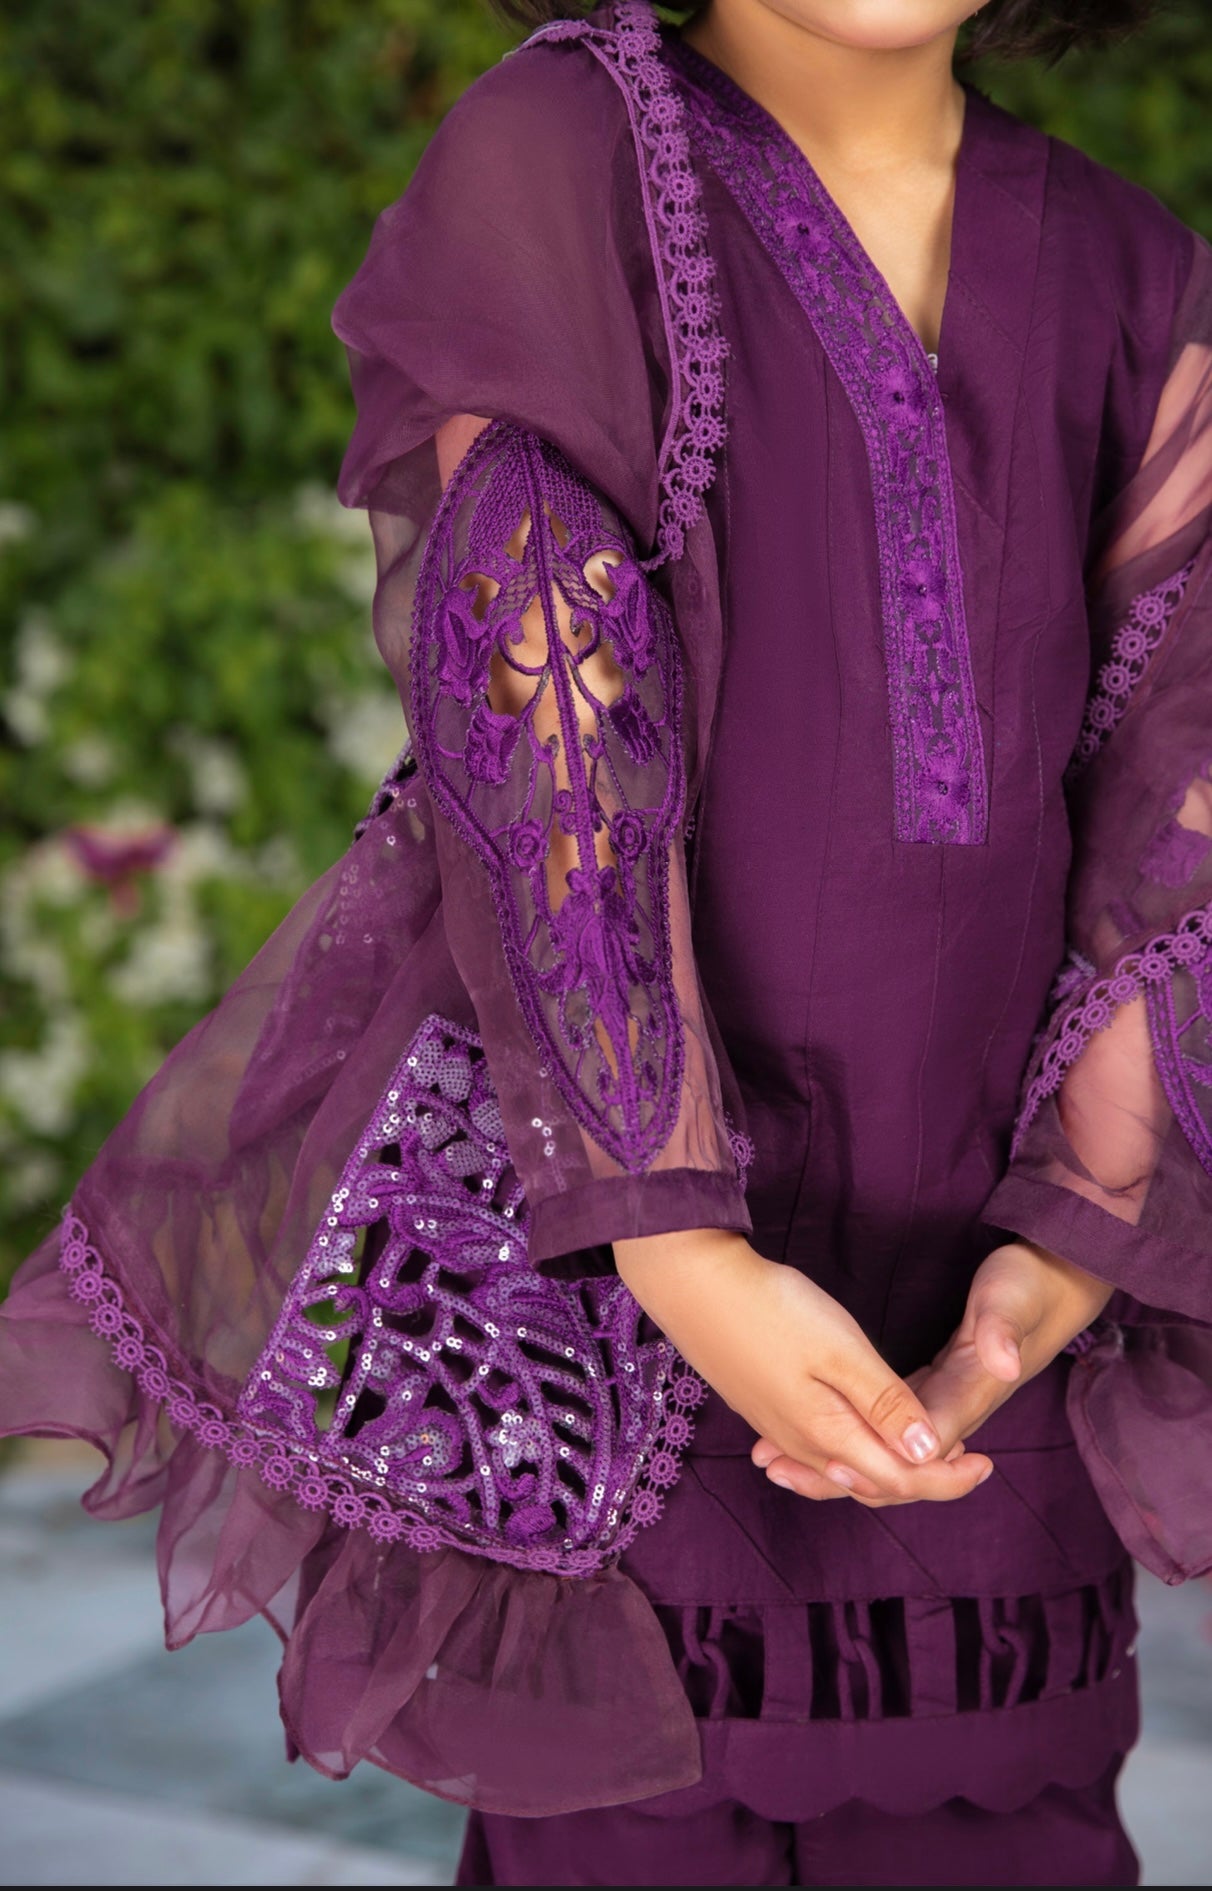 SIMRANS Ivana beaded embroidered lawn suit in purple Mother Daughter/kids